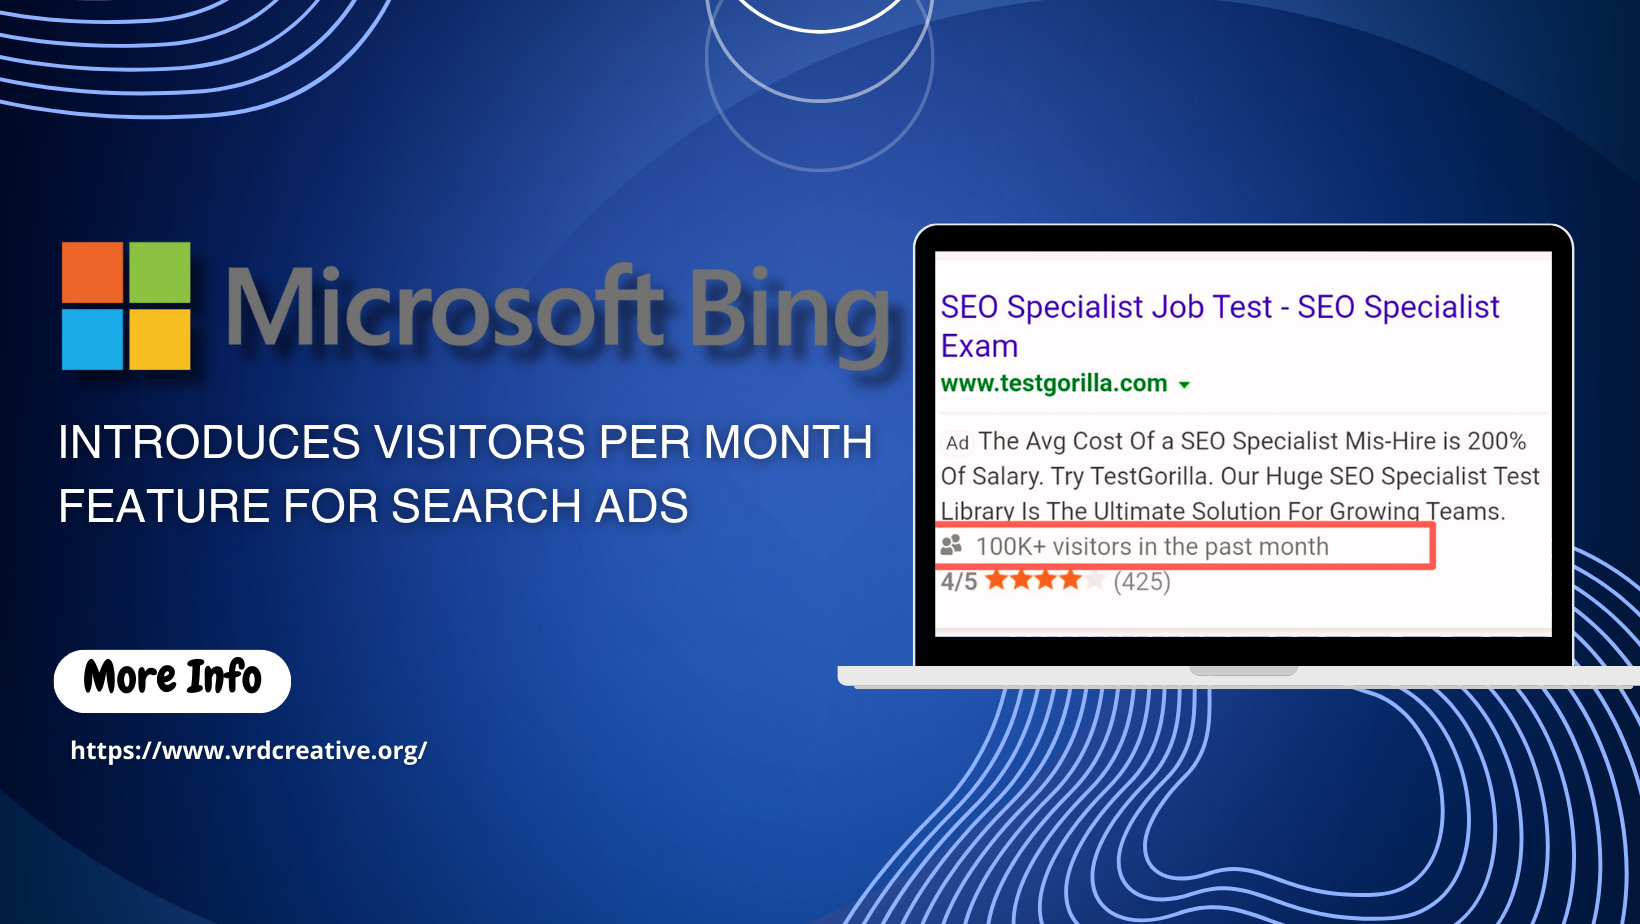 Microsoft Bing Introduces Visitors per Month Feature for Search Ads